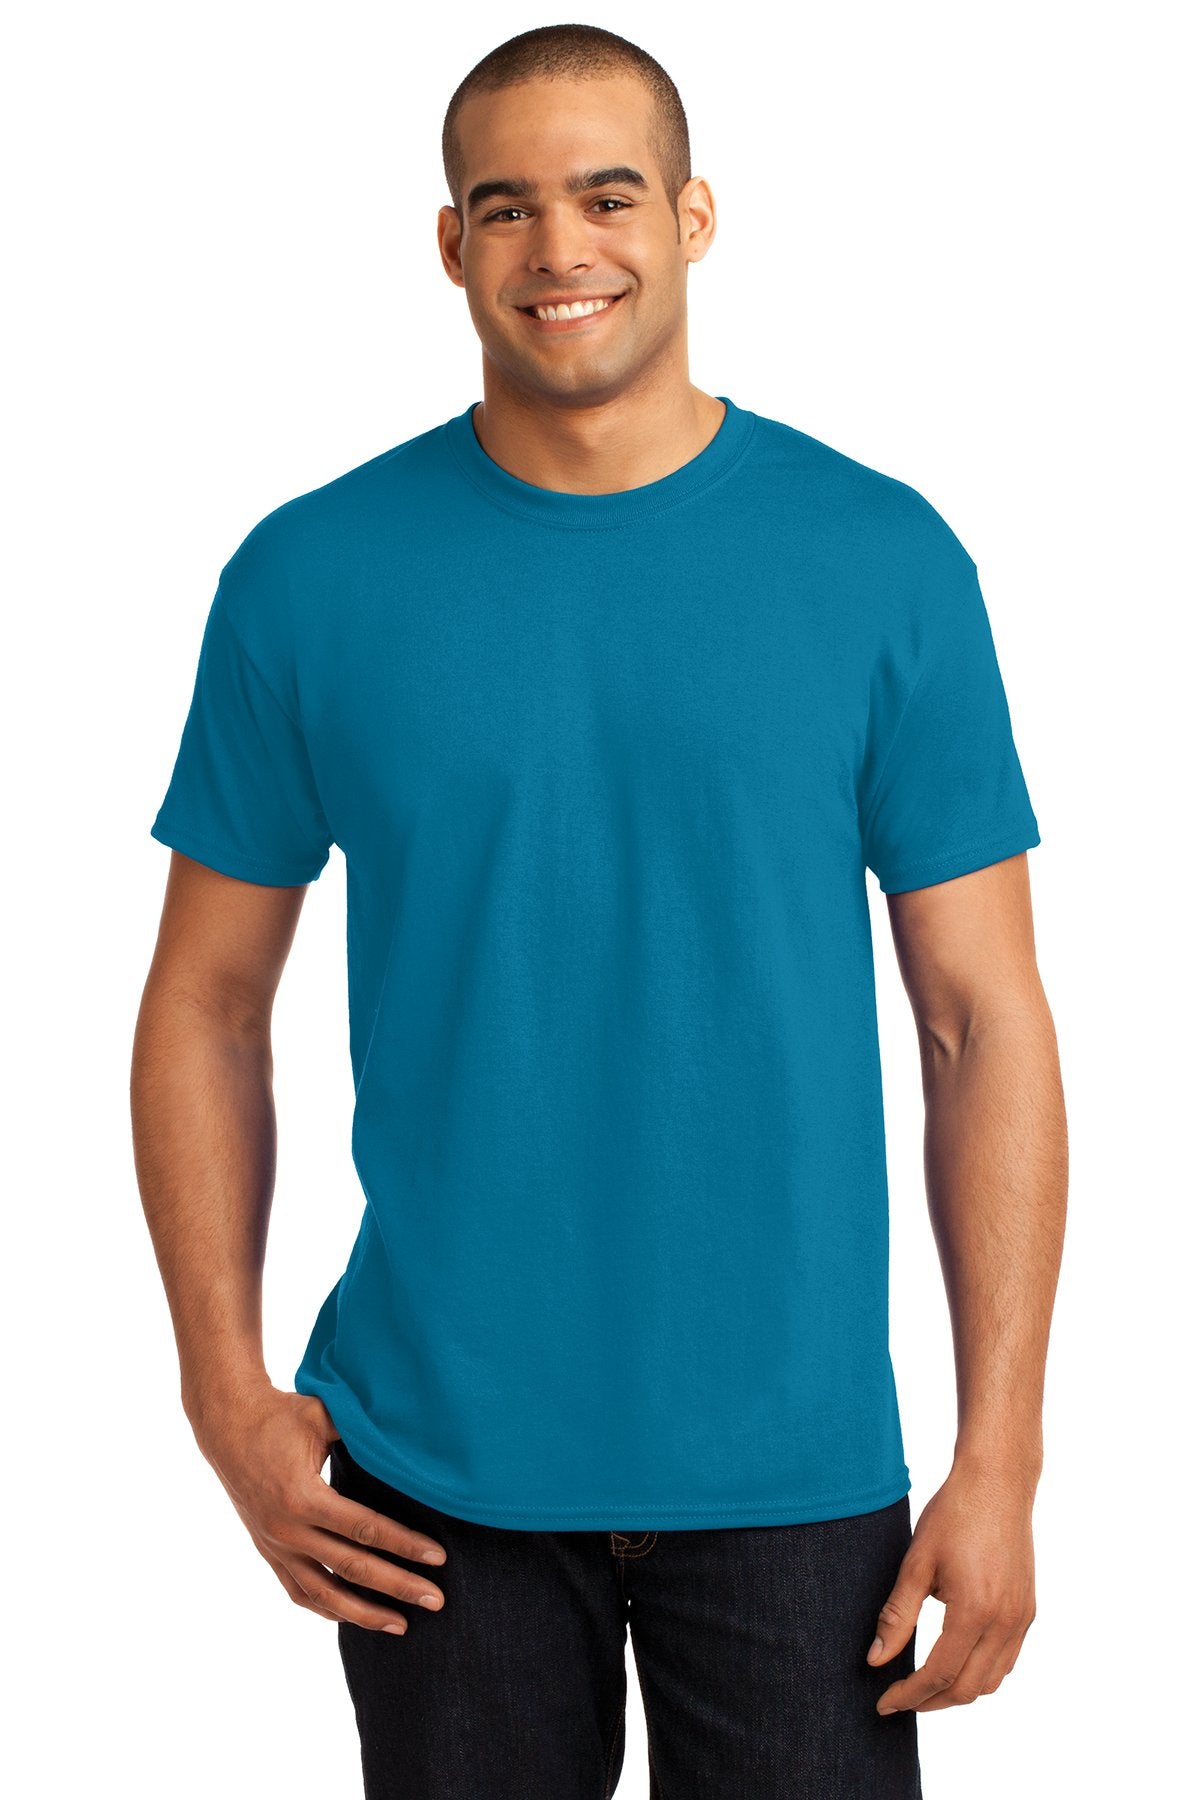 hanes ecosmart 50 50 cotton/poly t shirt 5170 teal